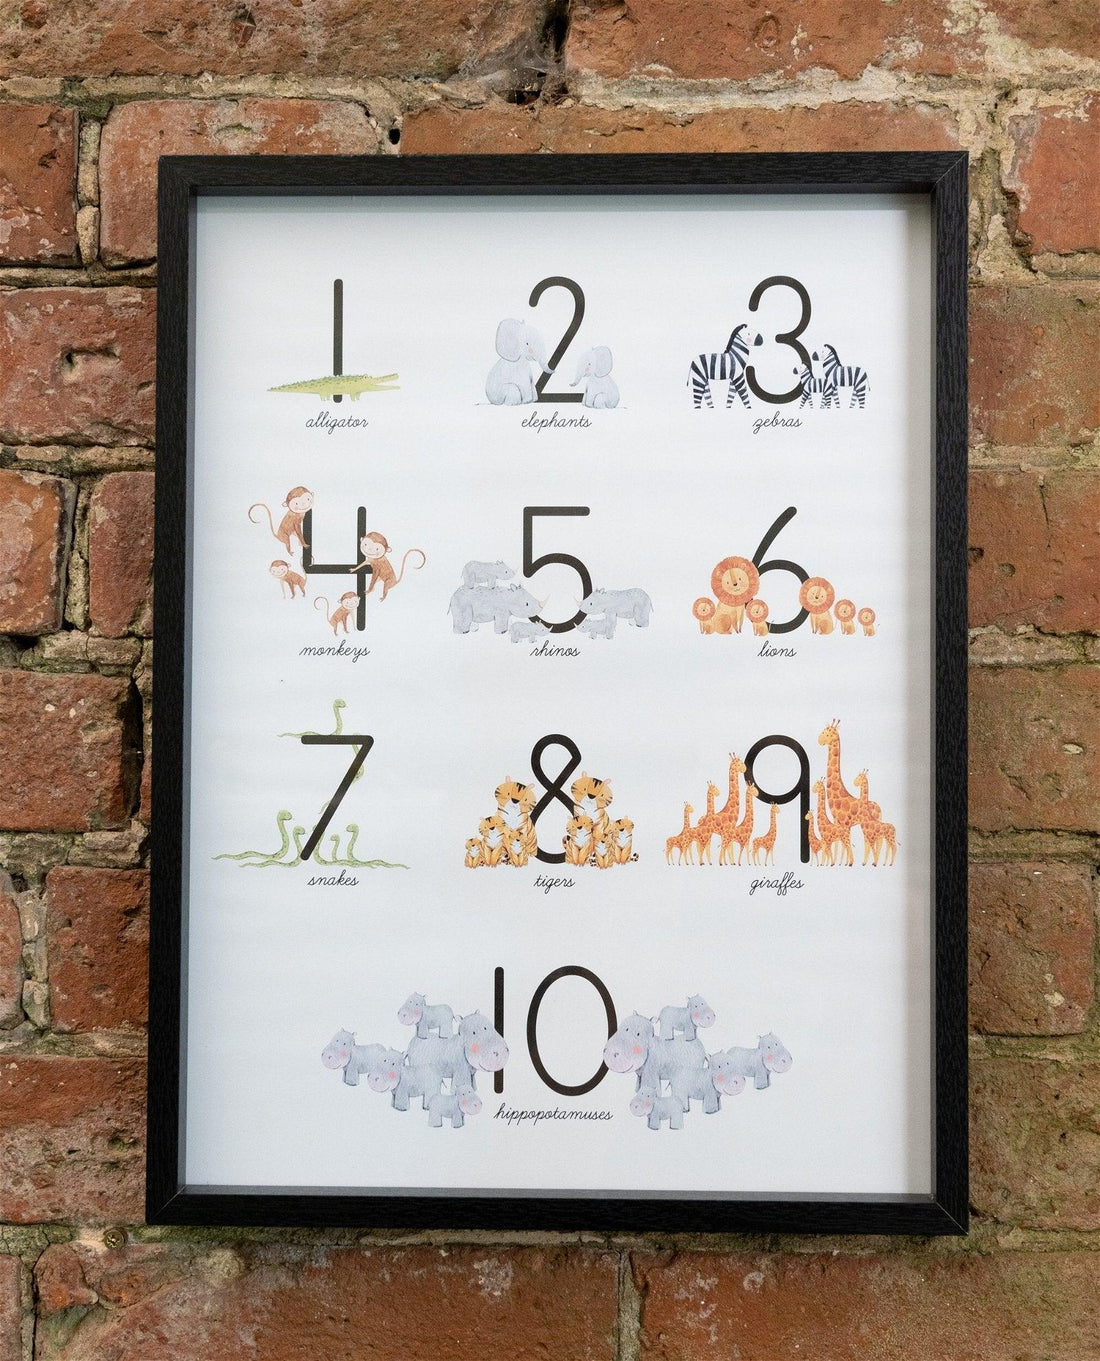 Baby Number 1-10 Animal Print Frame - £25.99 - Pictures 